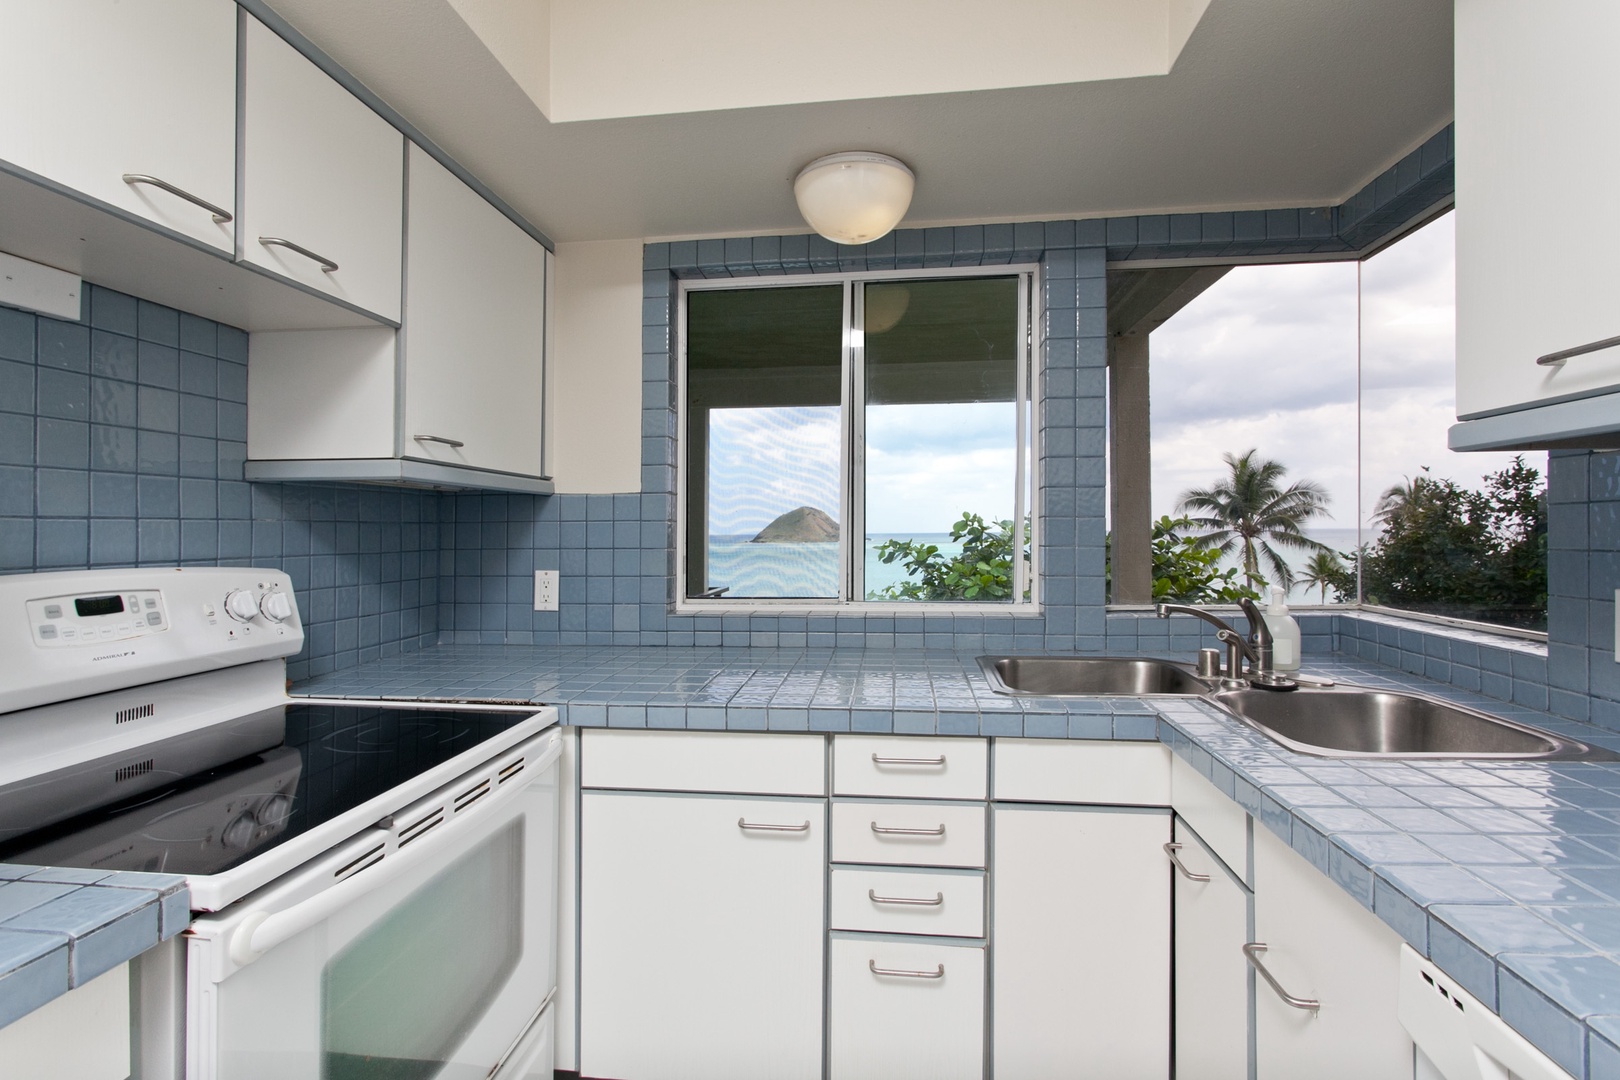 Kailua Vacation Rentals, Hale Kolea* - Mini-kitchen with white cabinetry and amazing views in the suite.